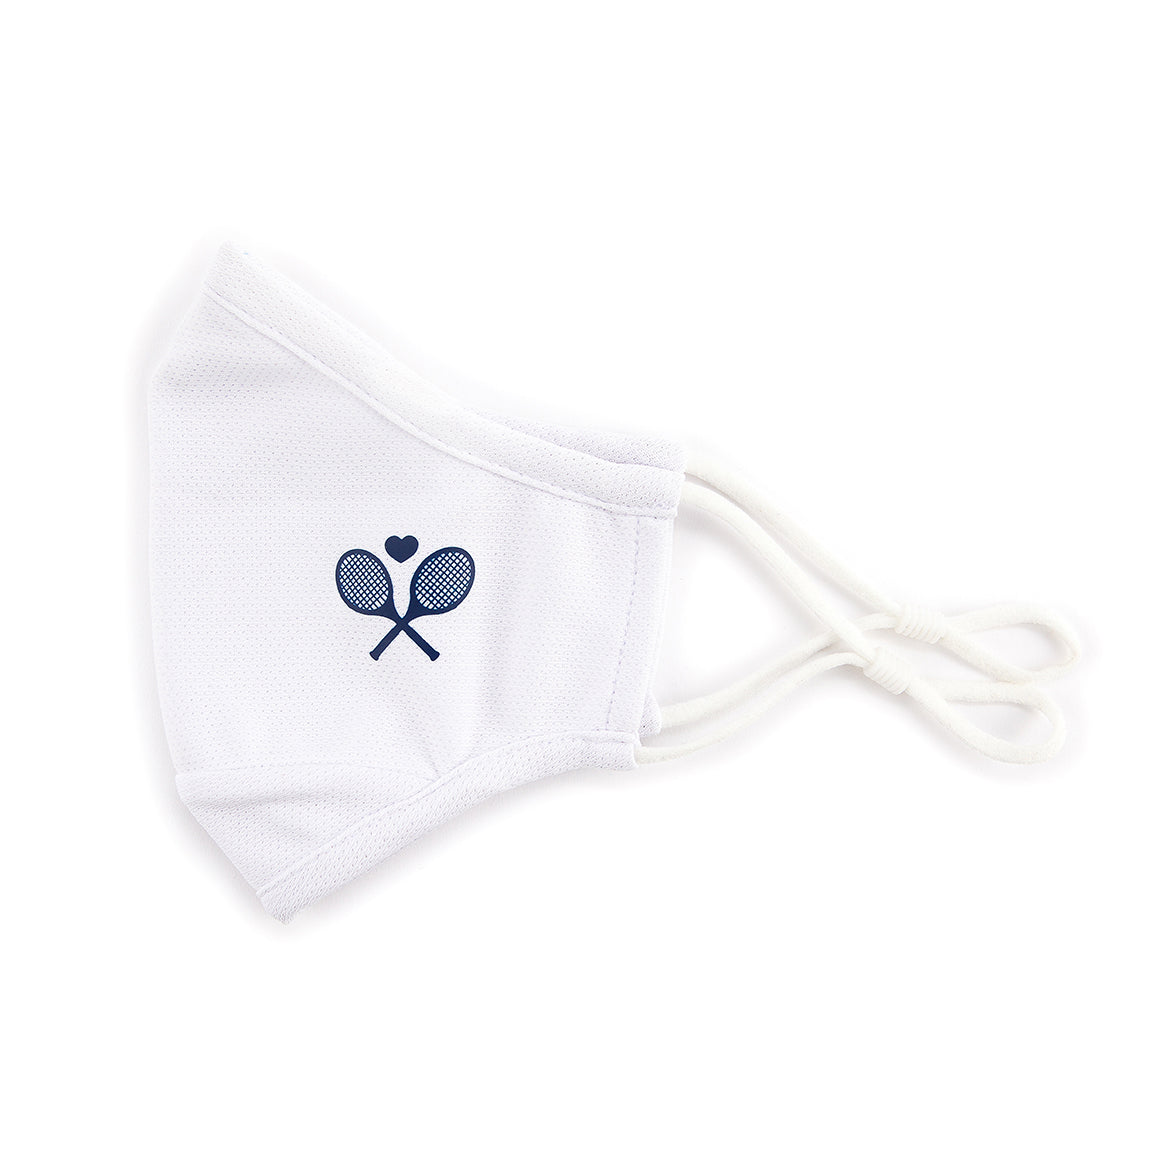 white face mask with navy crossed racquets printed on one side